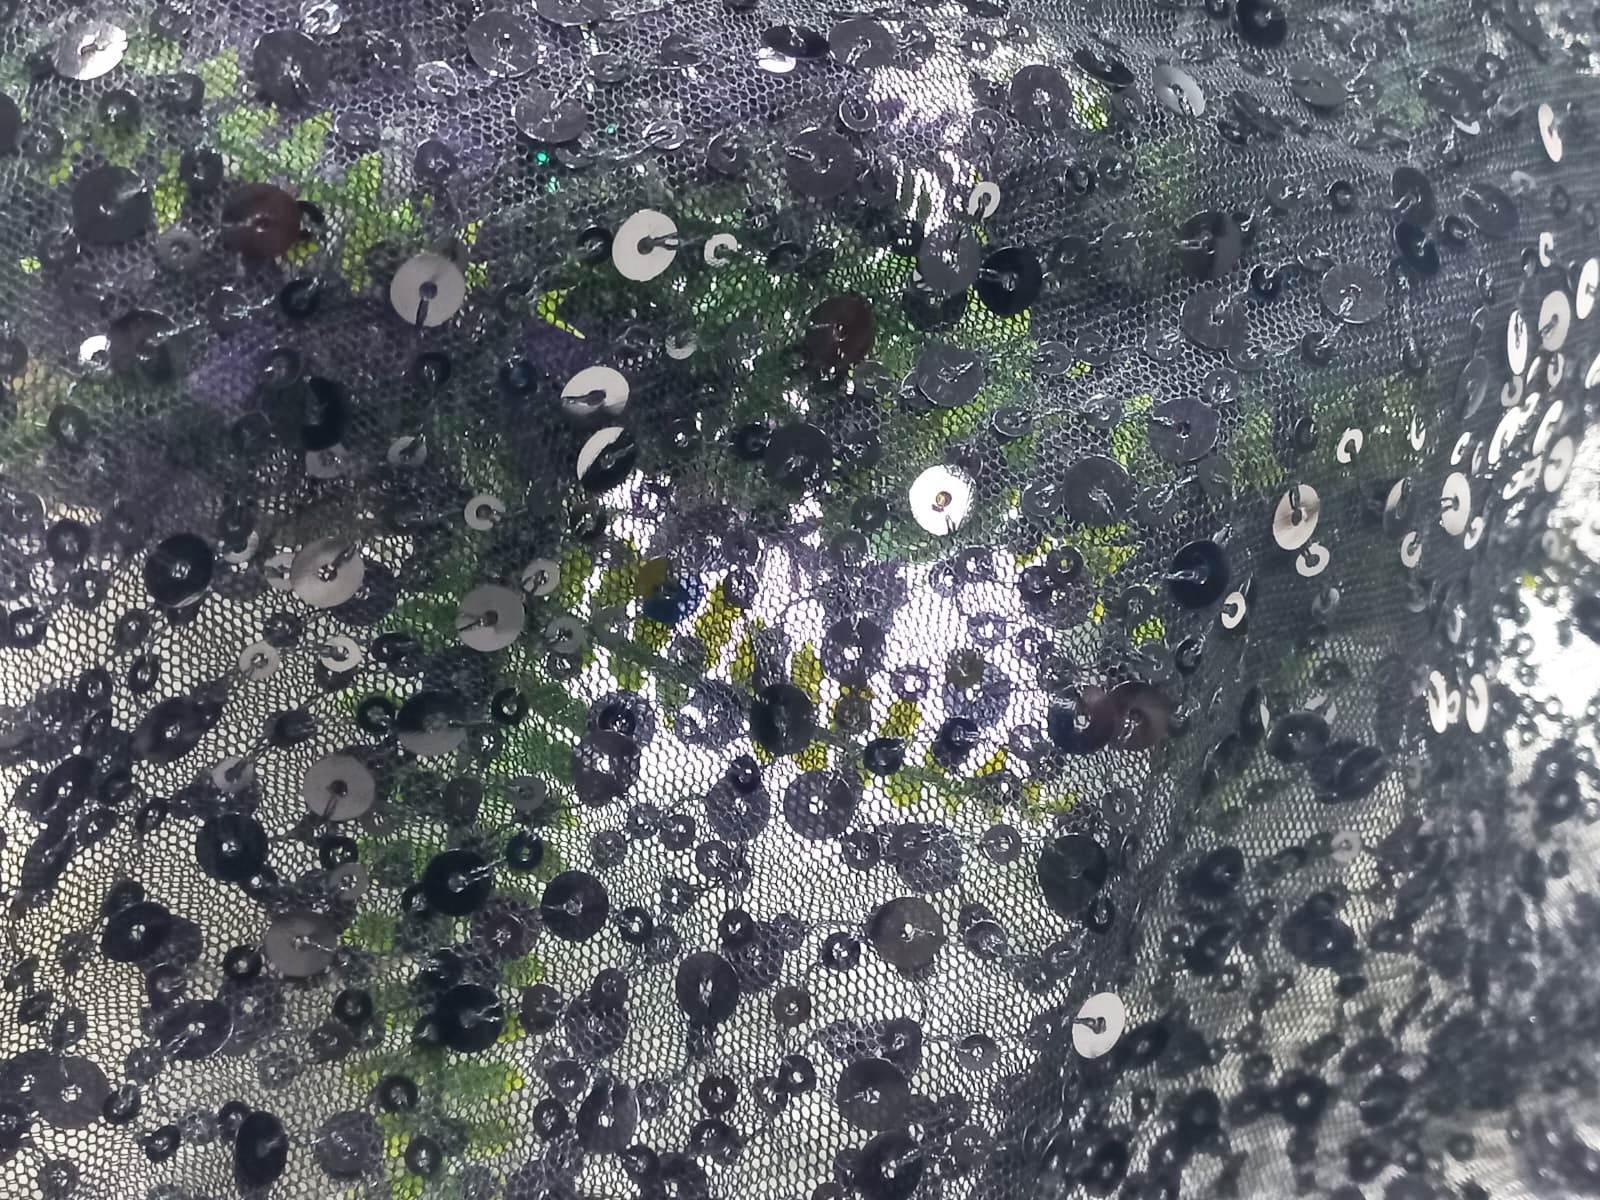 Sequins Embroidery fabric on Black mesh Net